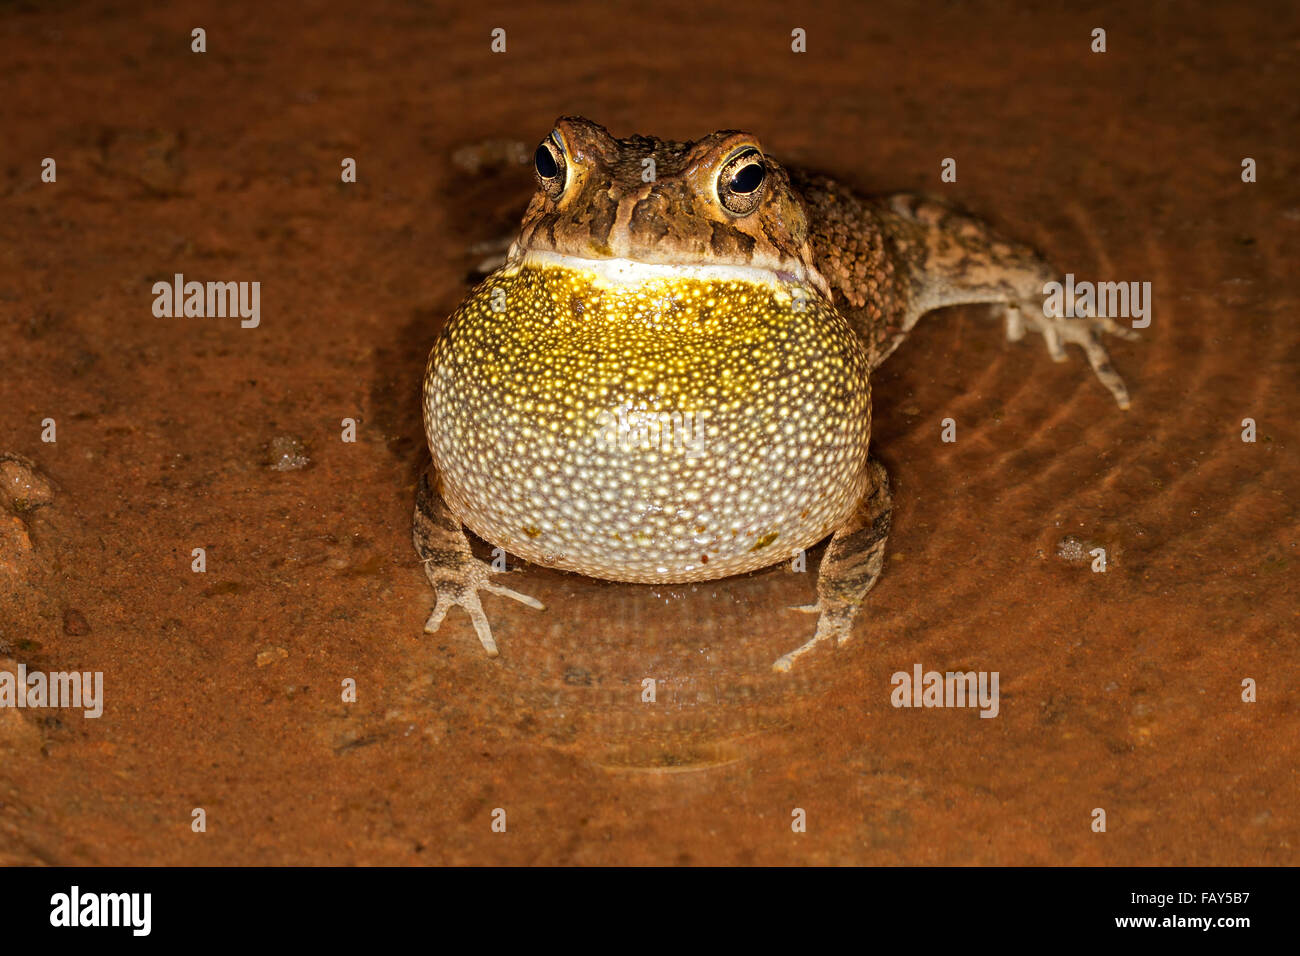 Male guttural toad (Amietophrynus gutturalis) calling in shallow water, South Africa Stock Photo